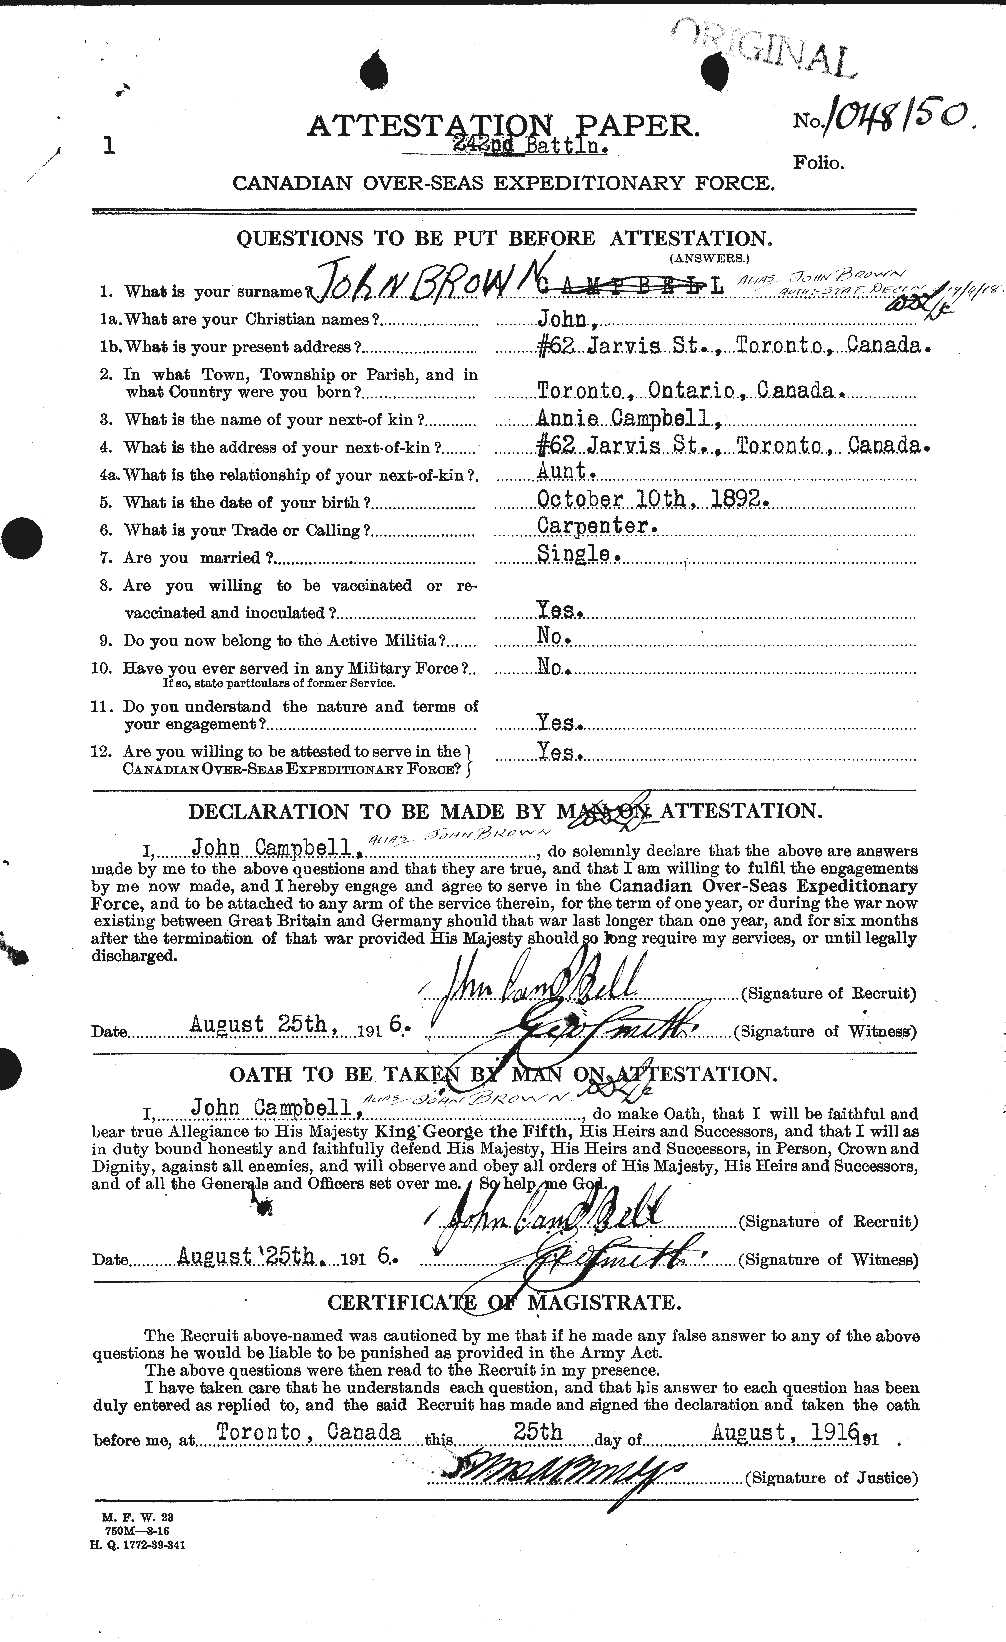 Personnel Records of the First World War - CEF 263925a